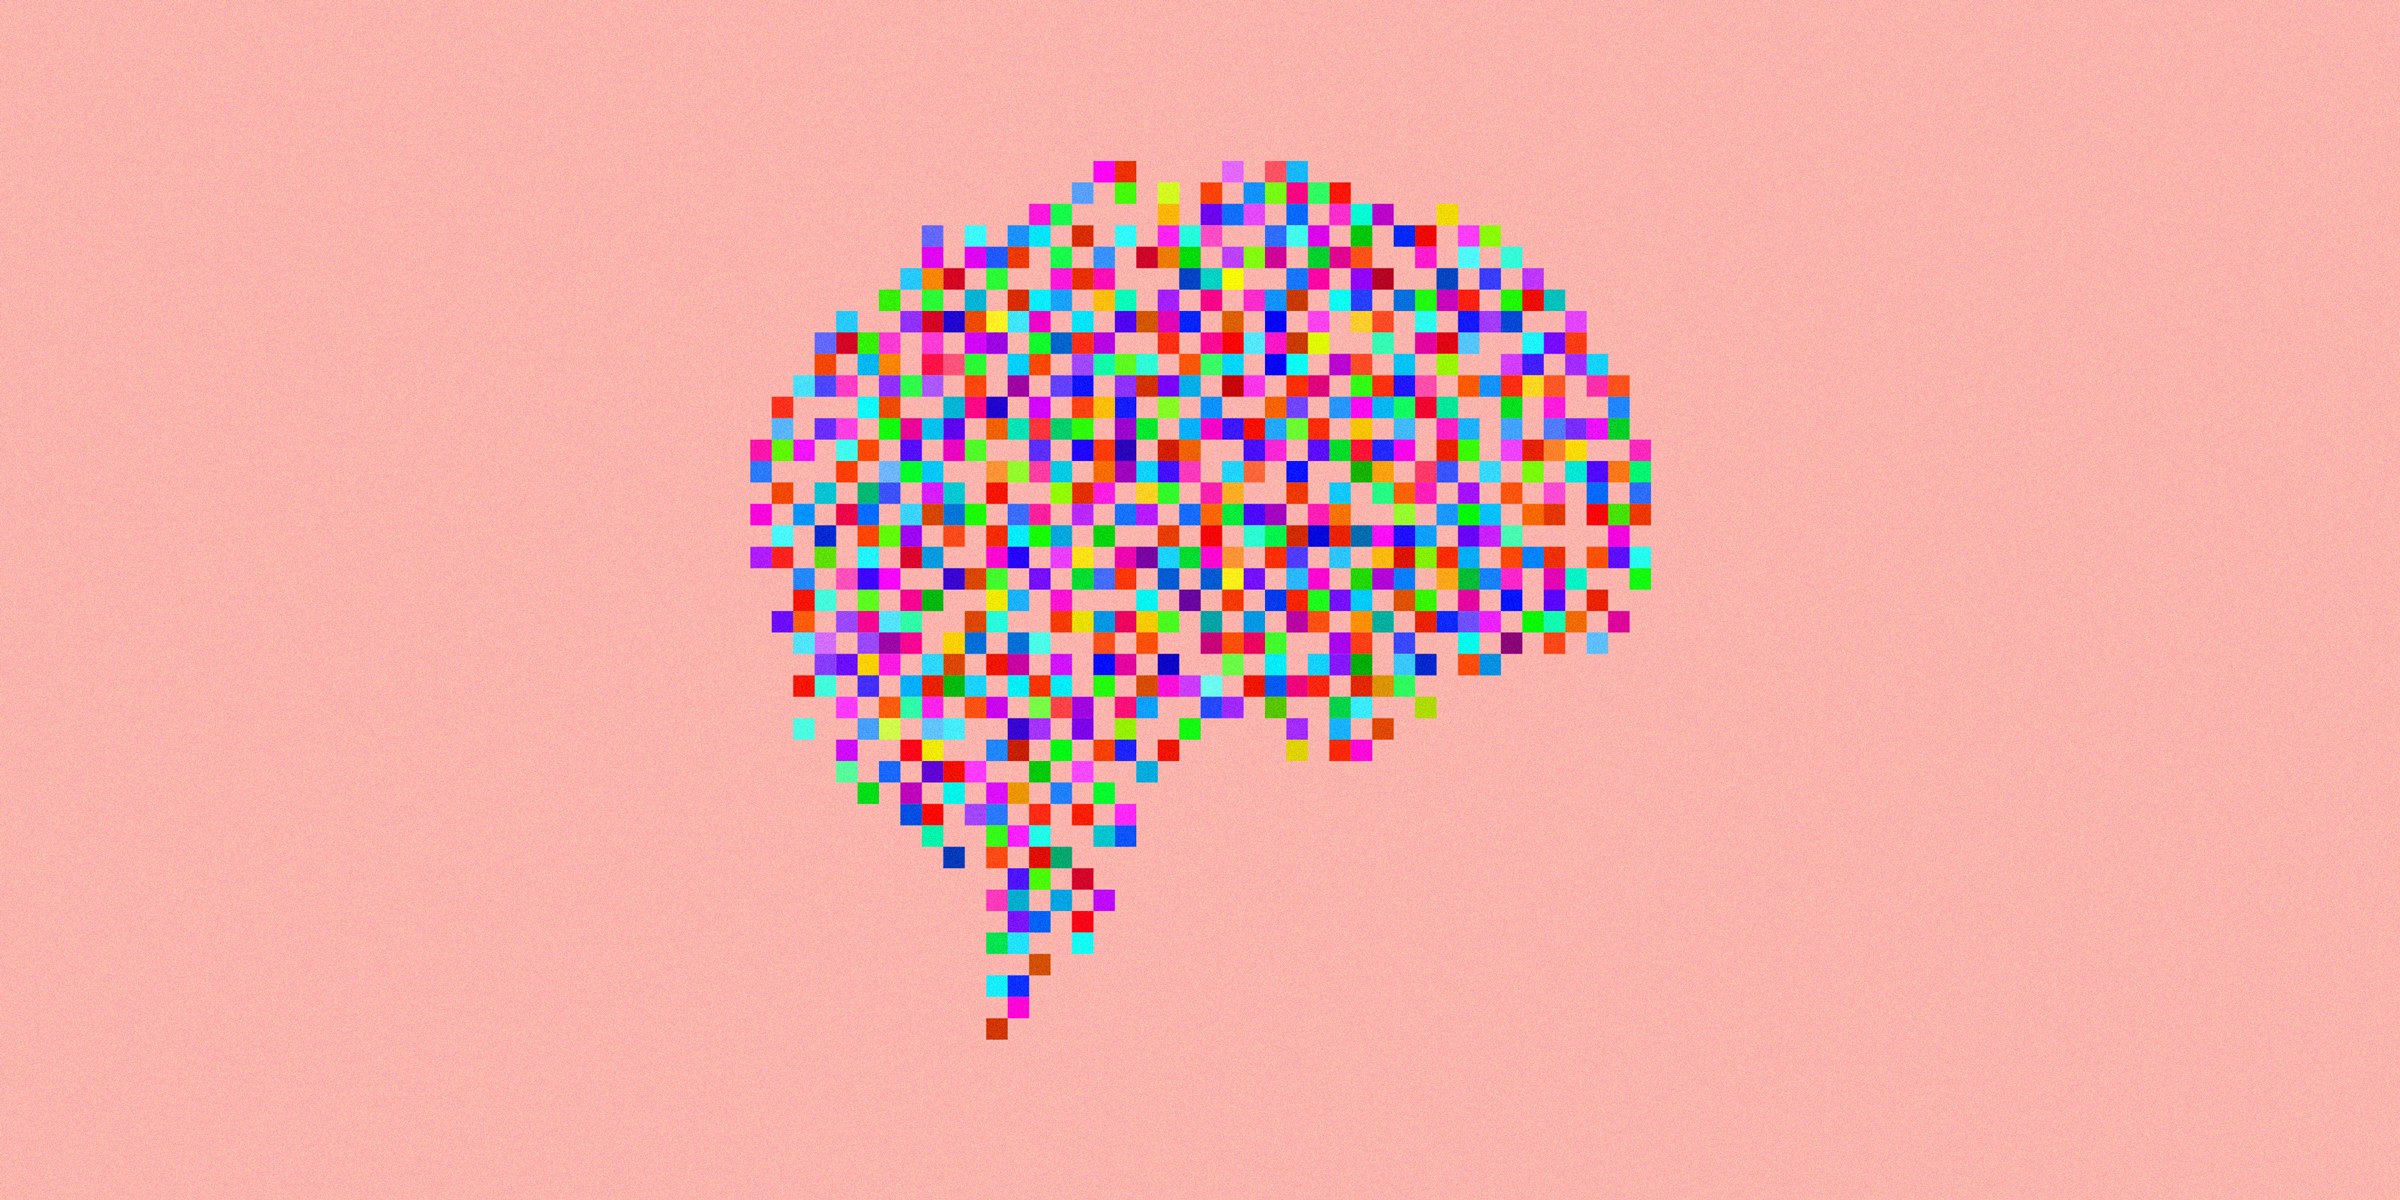 Does our brain deep learning for understanding the world?